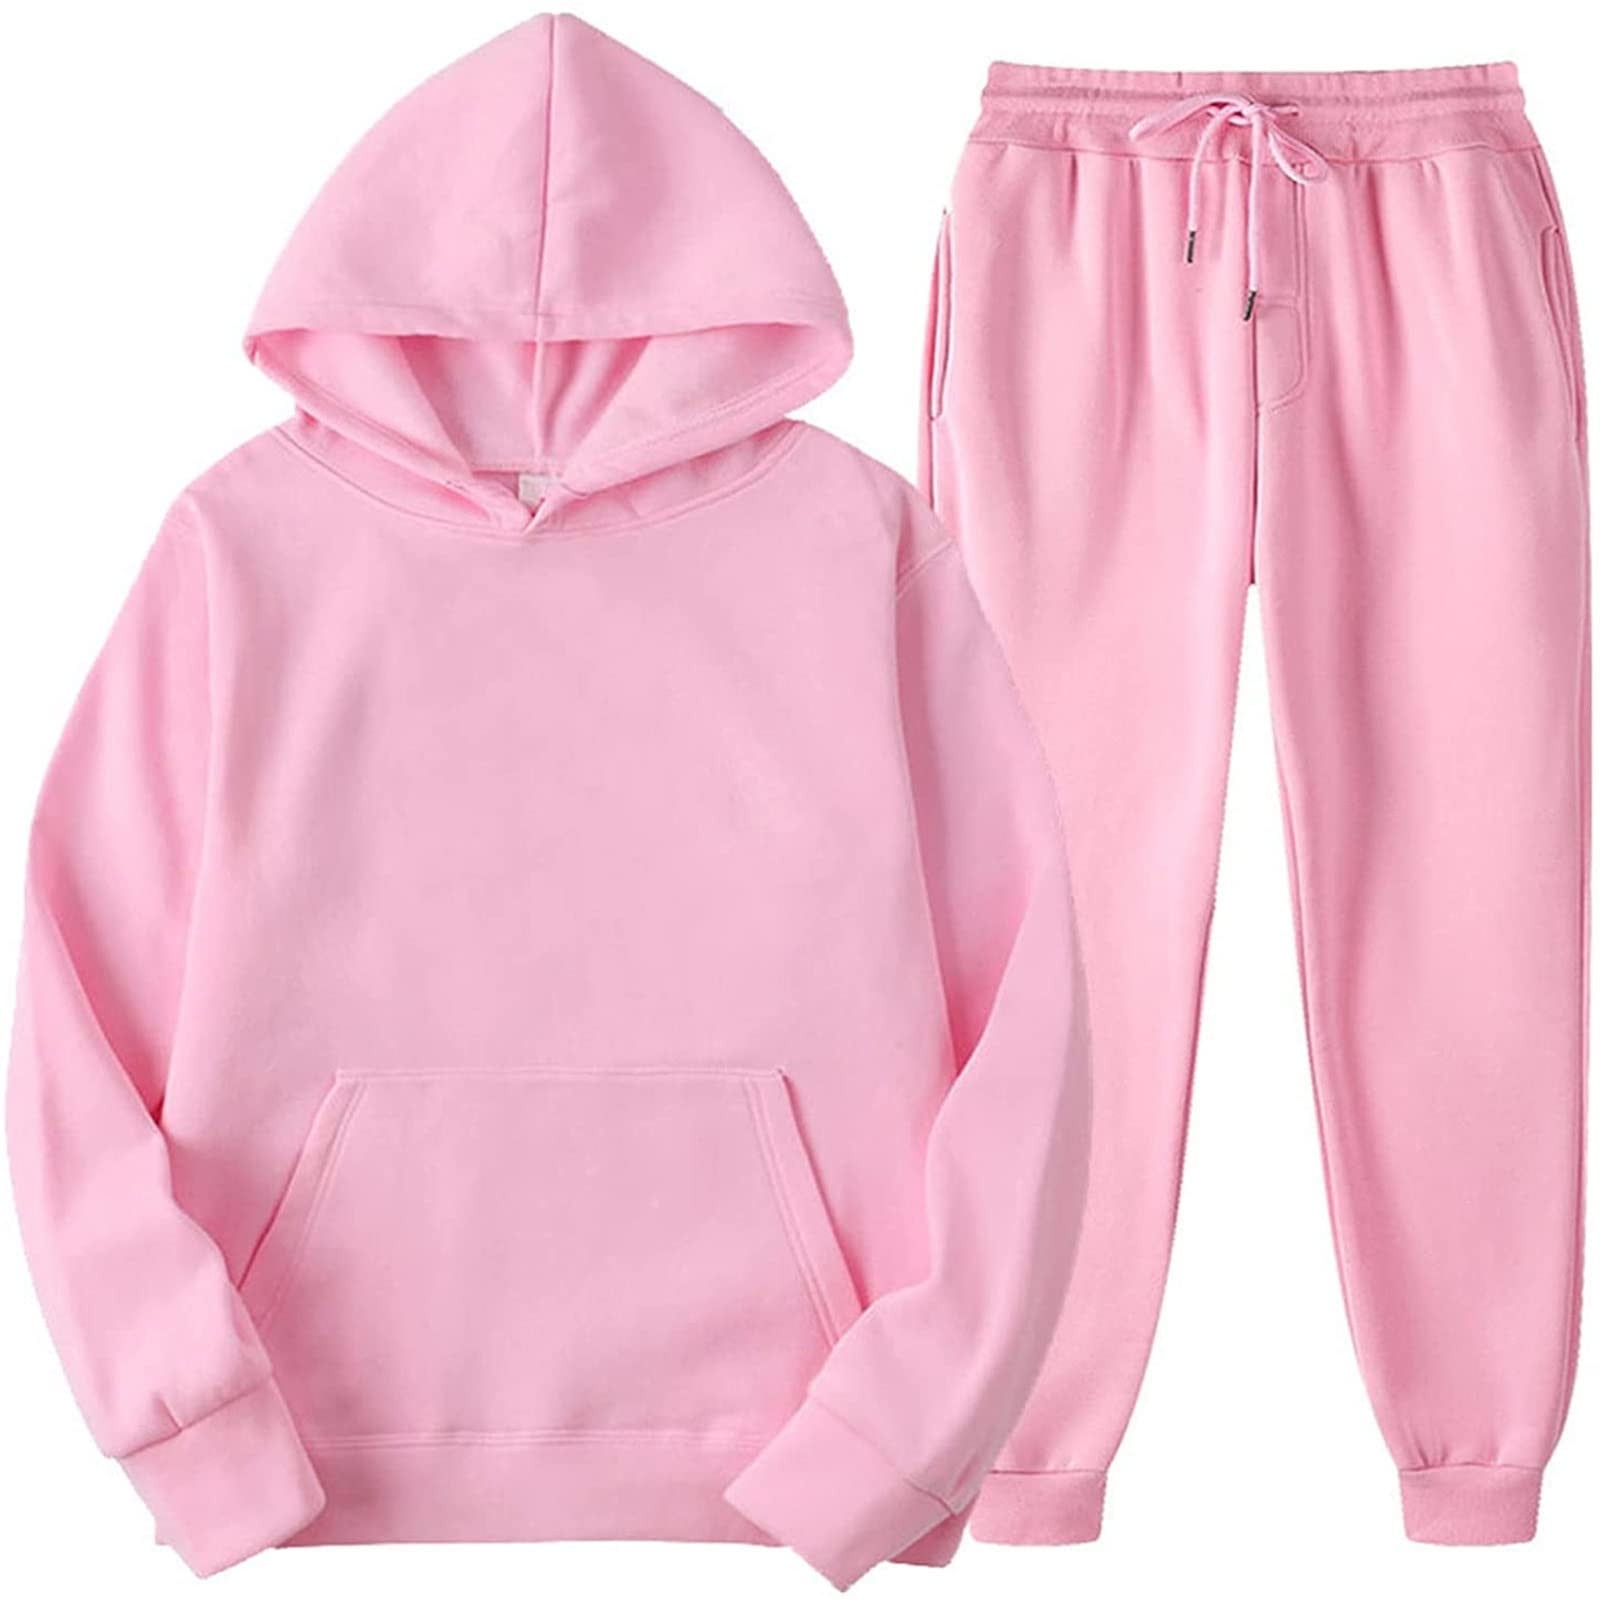 YDKZYMD Hoodies Tracksuit Sweatsuits for Women Set Mens 2 Piece Hooded ...